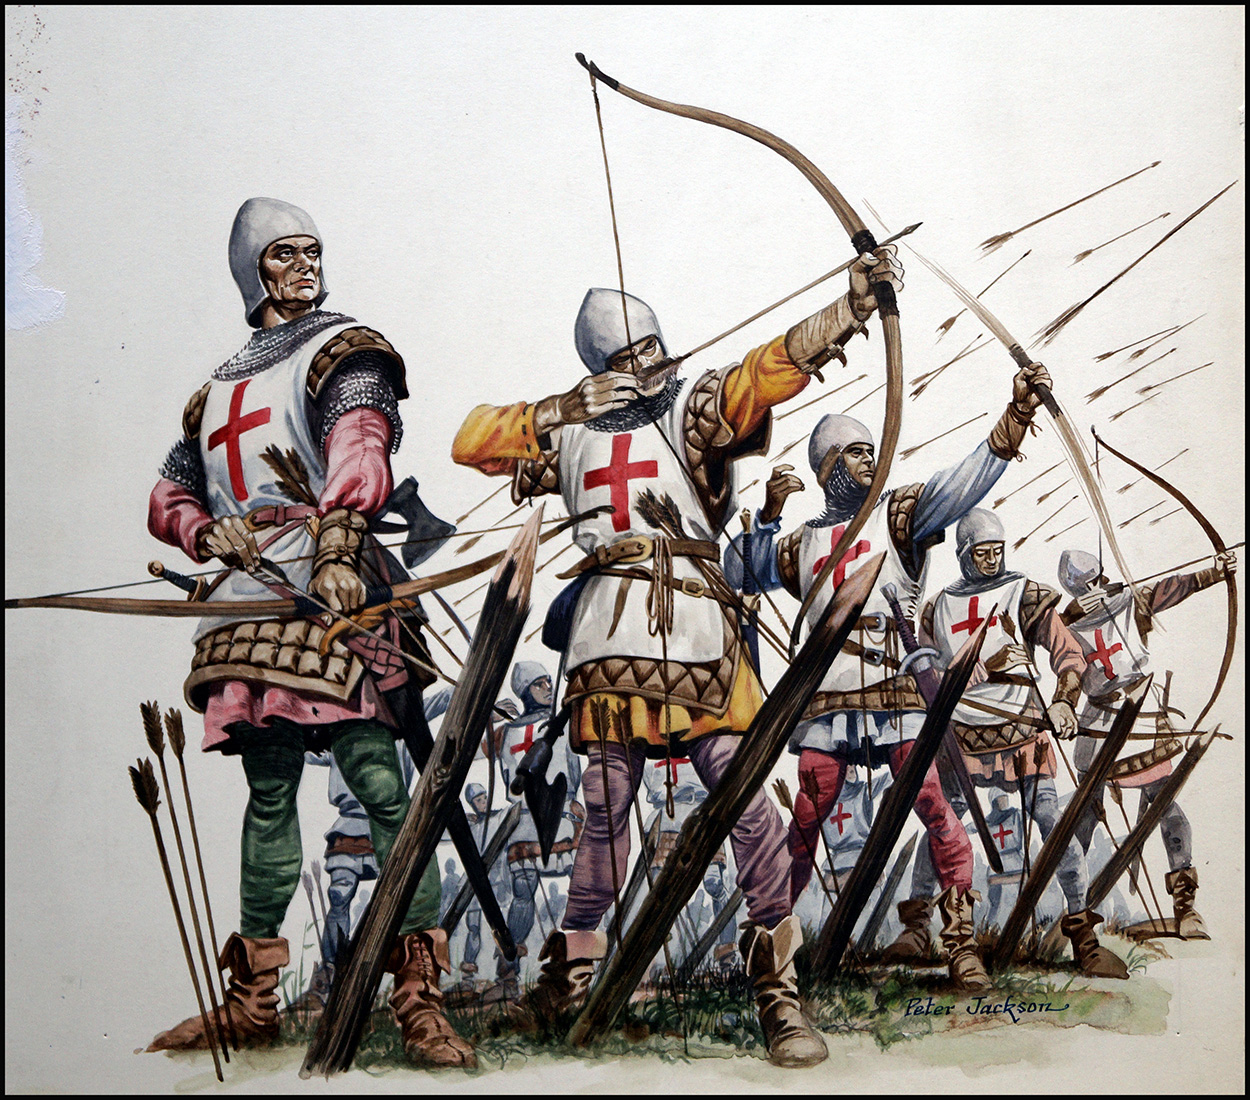 The Archers Of Crecy (Original) (Signed) art by British History (Peter Jackson) at The Illustration Art Gallery